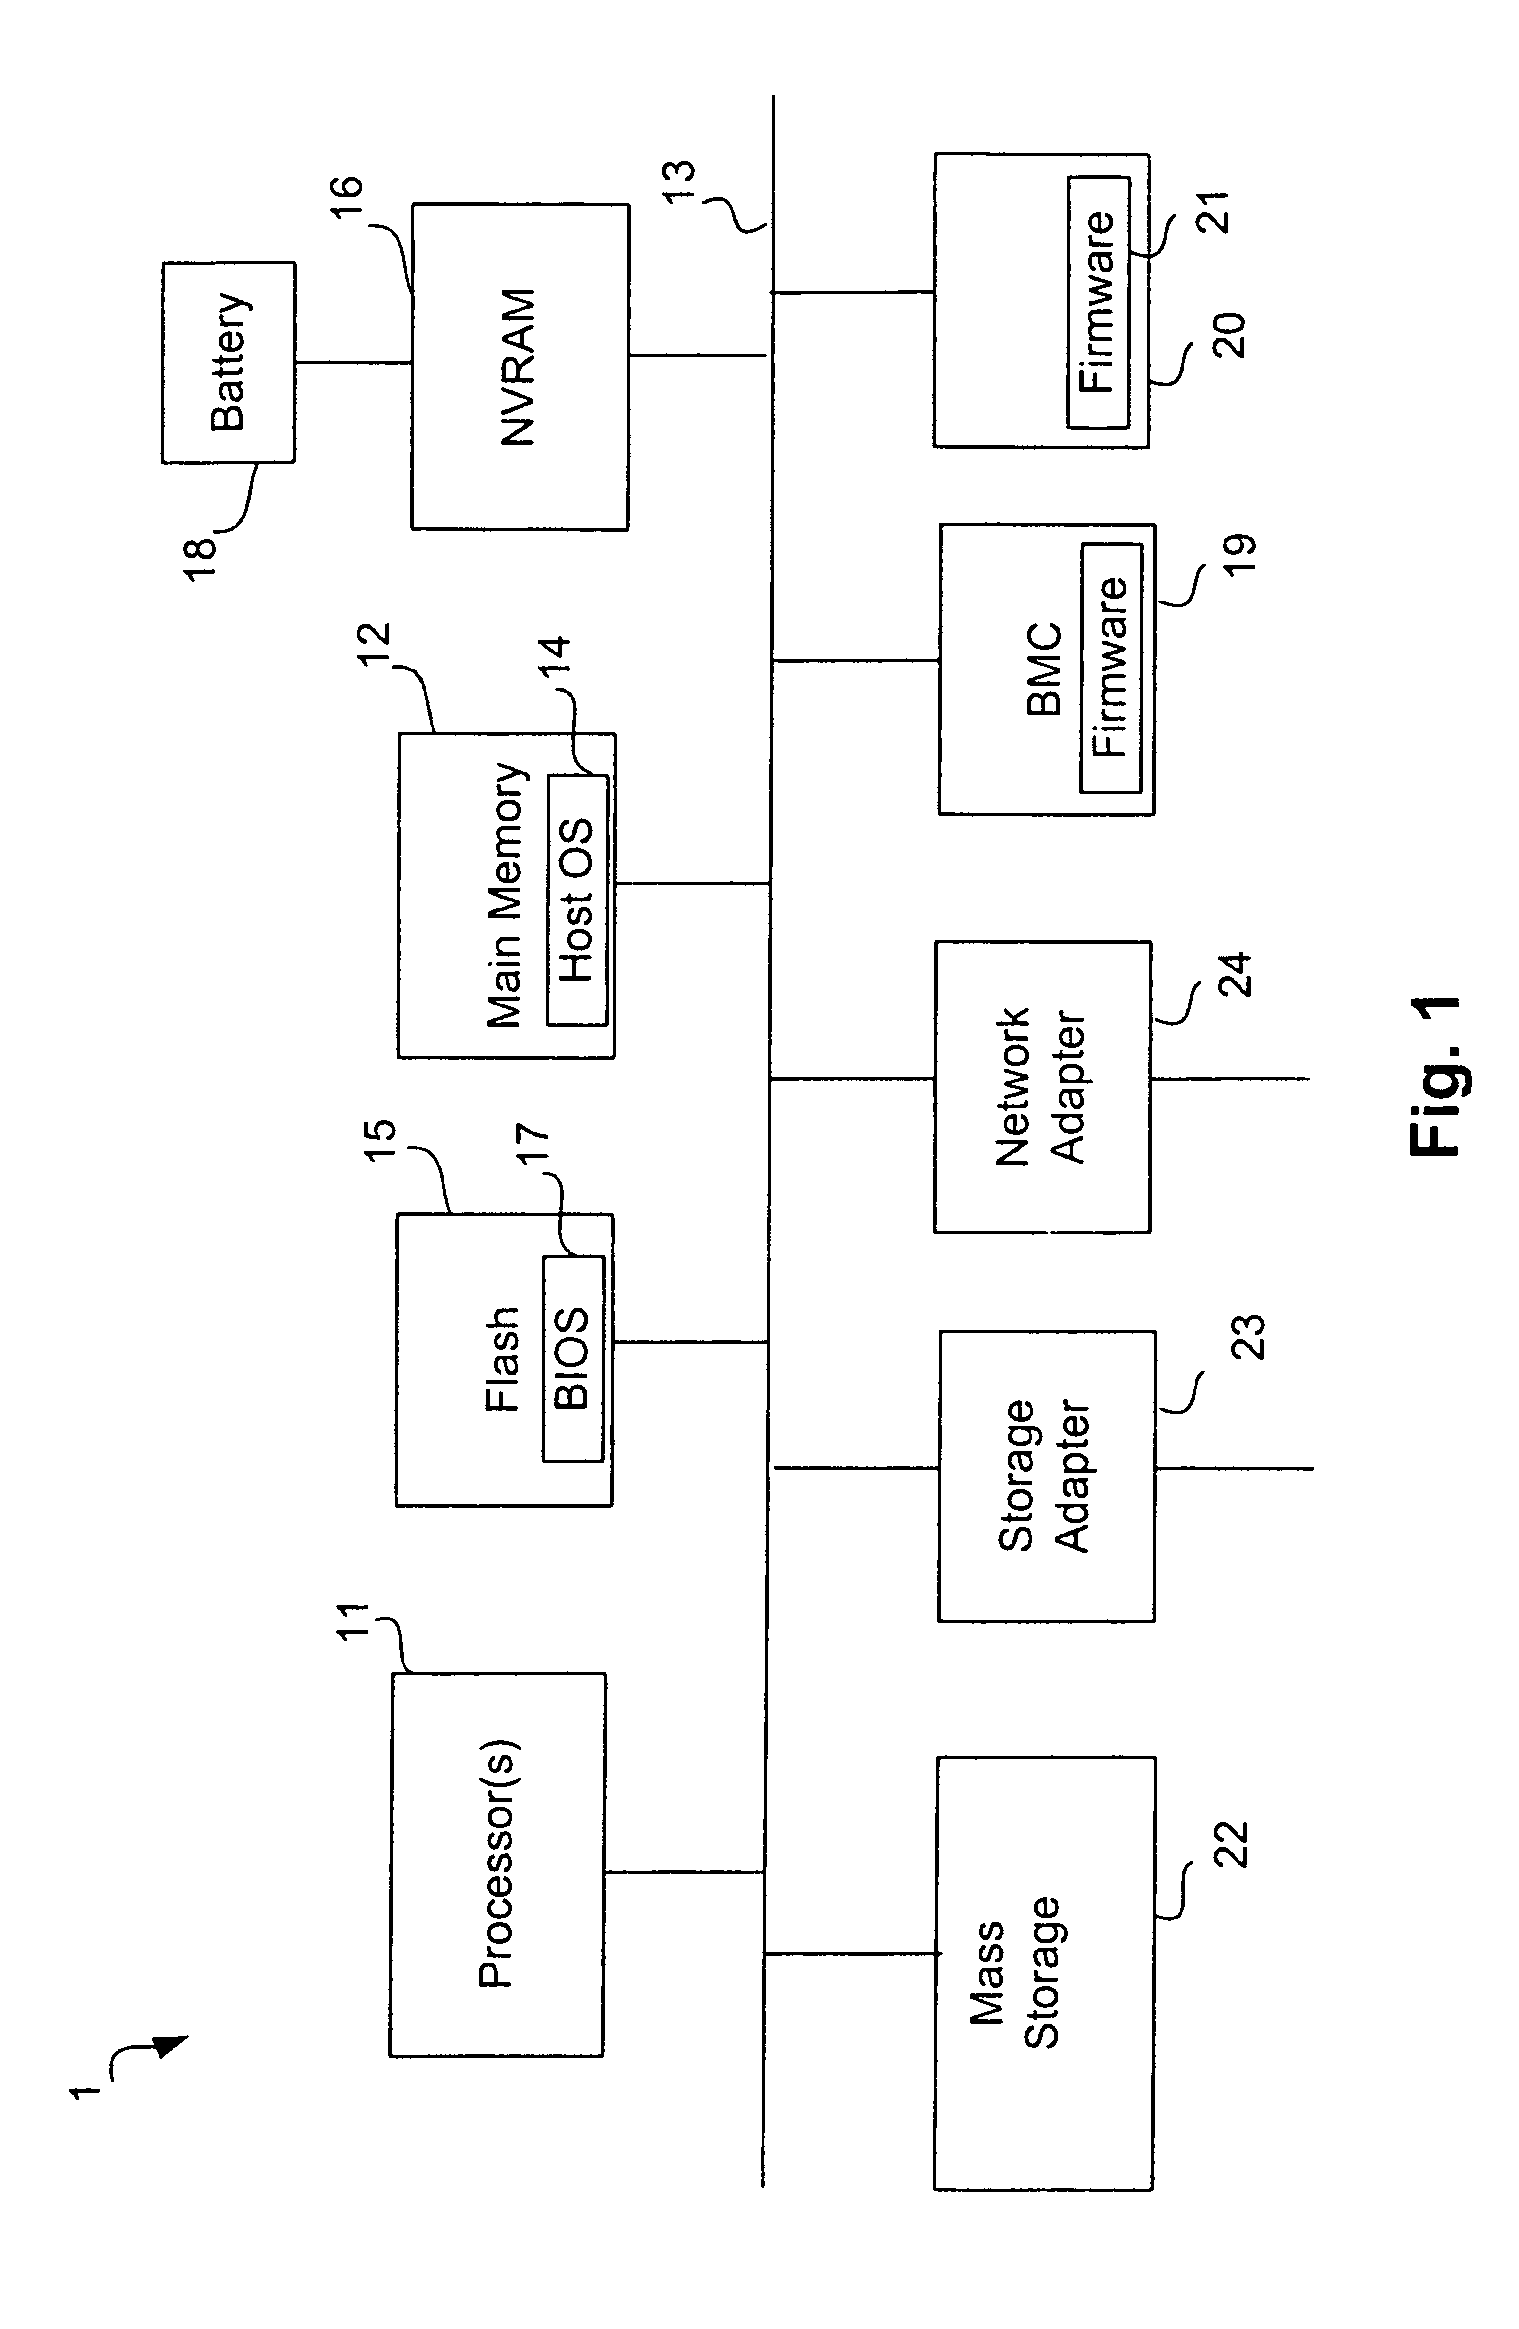 Use of a baseboard management controller to facilitate installation of firmware in a processing system